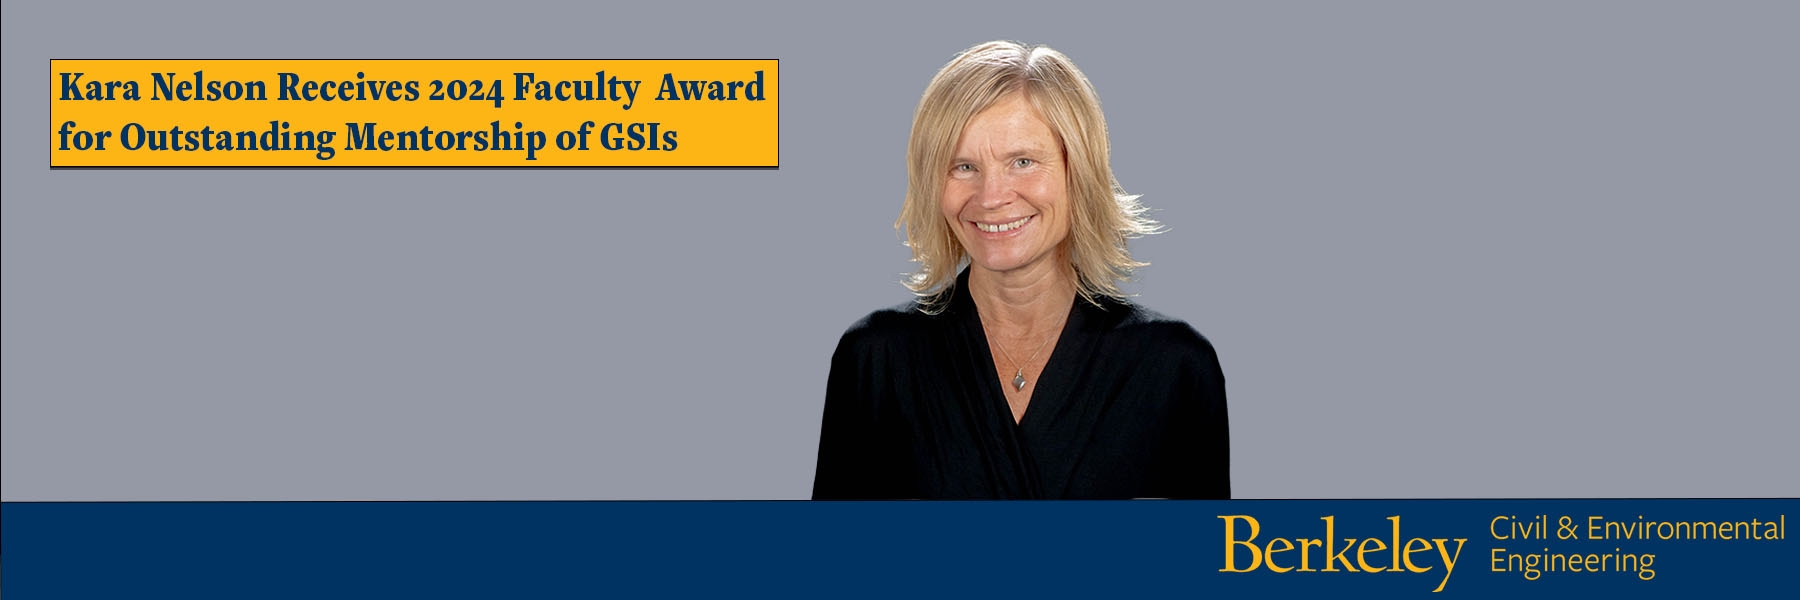 Picture of Kara Nelson with text: Kara Nelson Receives 2024 Faculty Award for Outstanding Mentorship of GSIs.